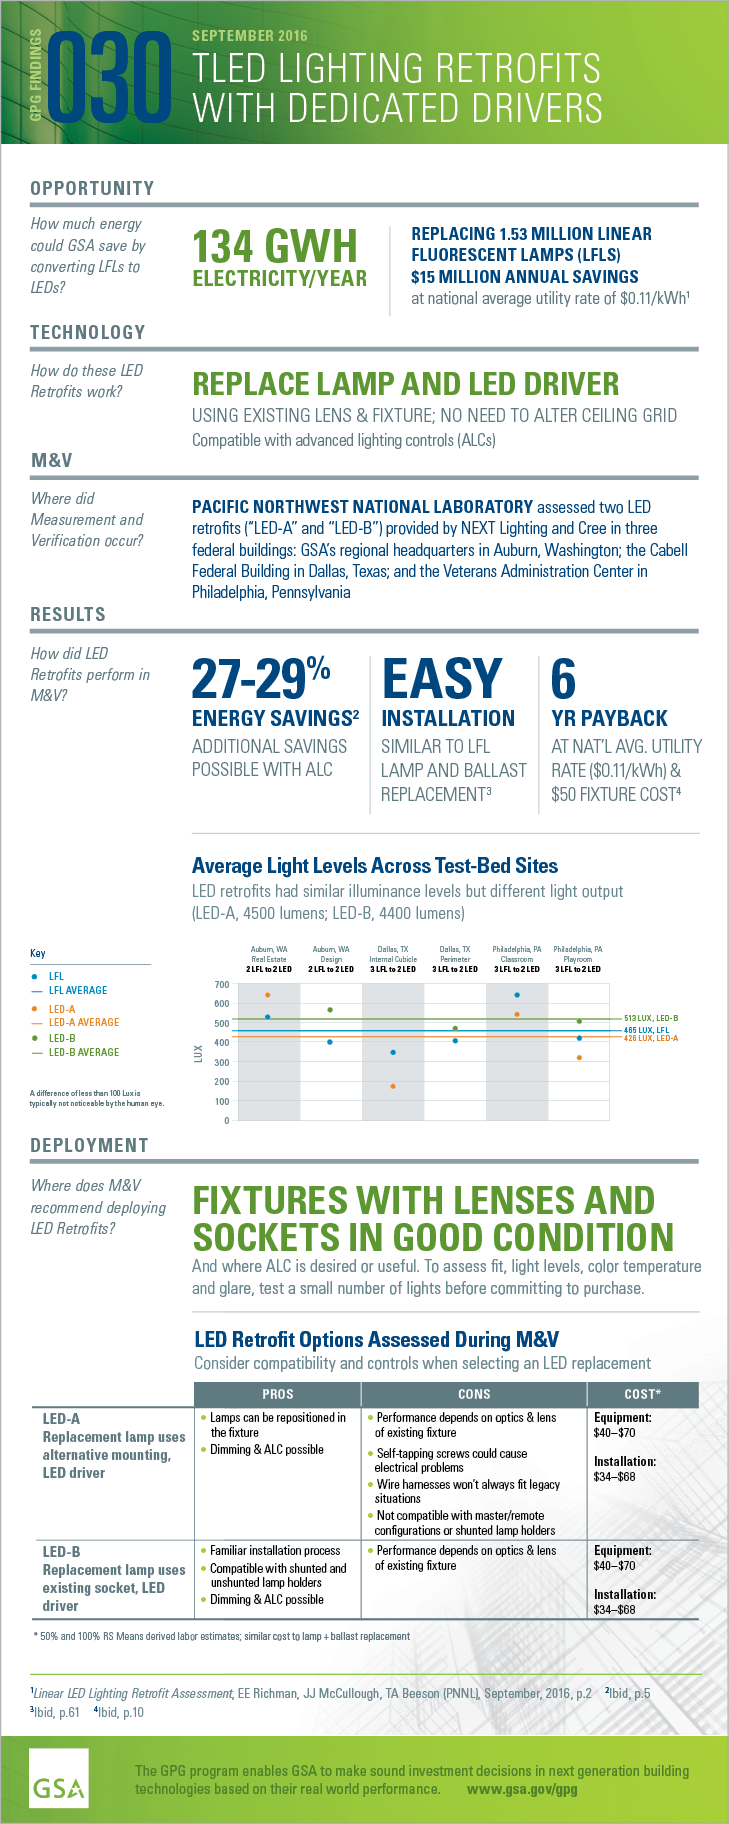 Download the PDF of the full-size infographic for GPG030 TLED Lighting Retrofits.